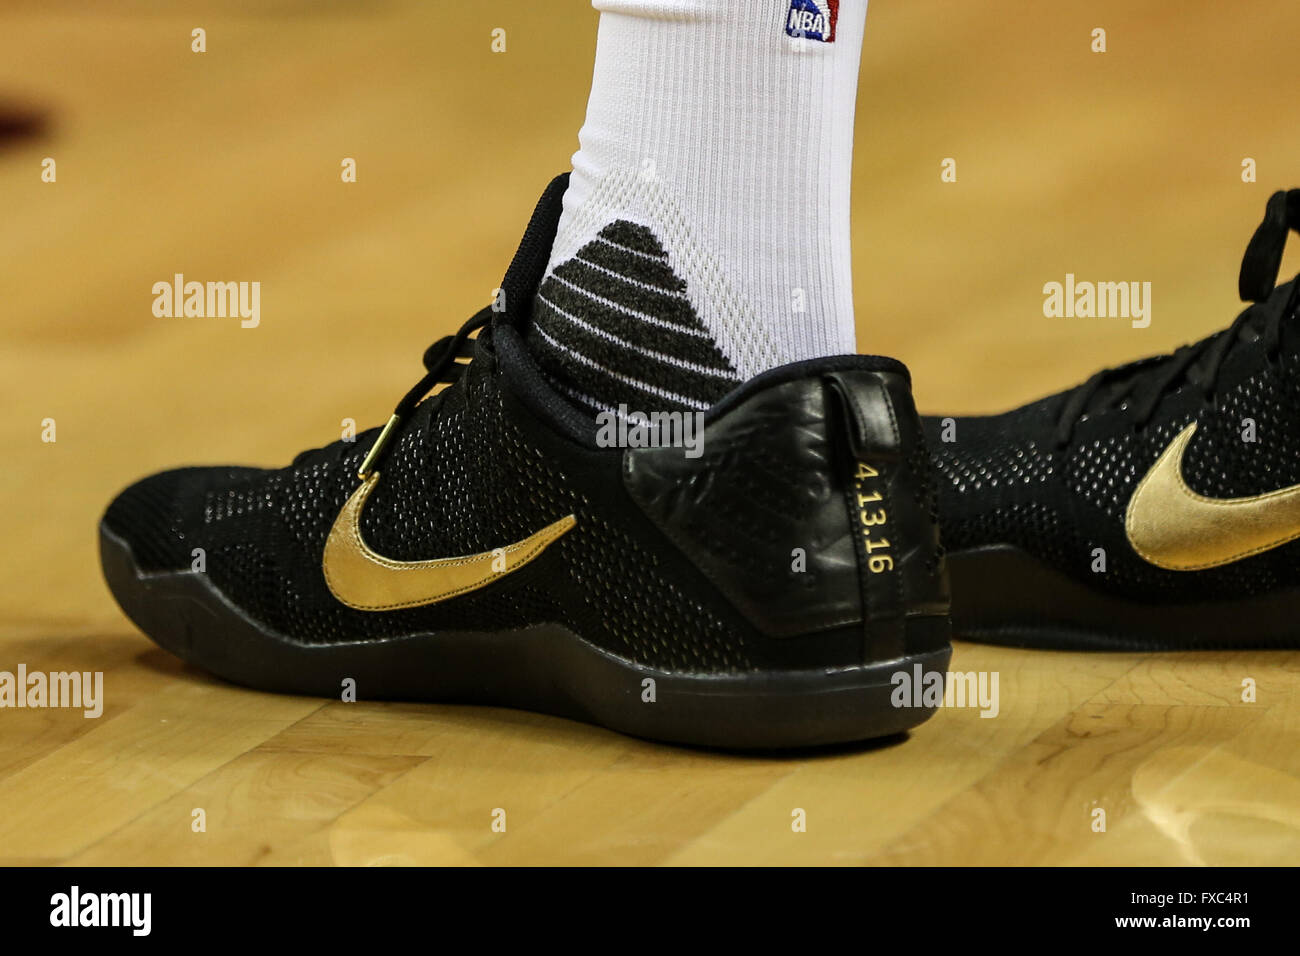 what shoes did kobe wear in his last game